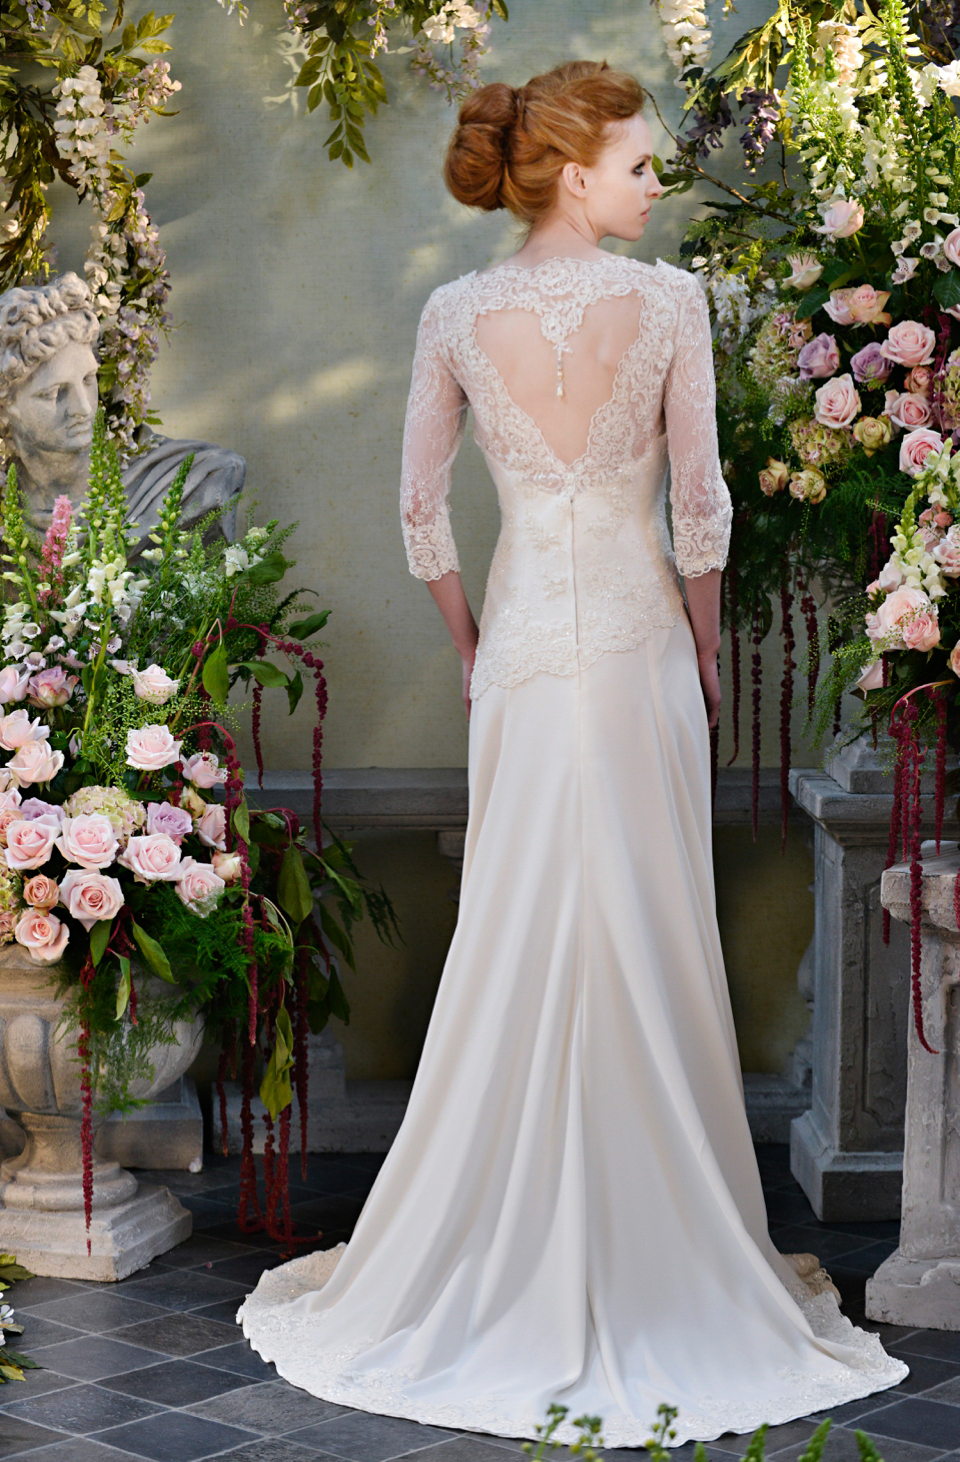 Long Sleeve Wedding Dress Entice from Terry Fox's 2015 Bridal Collection